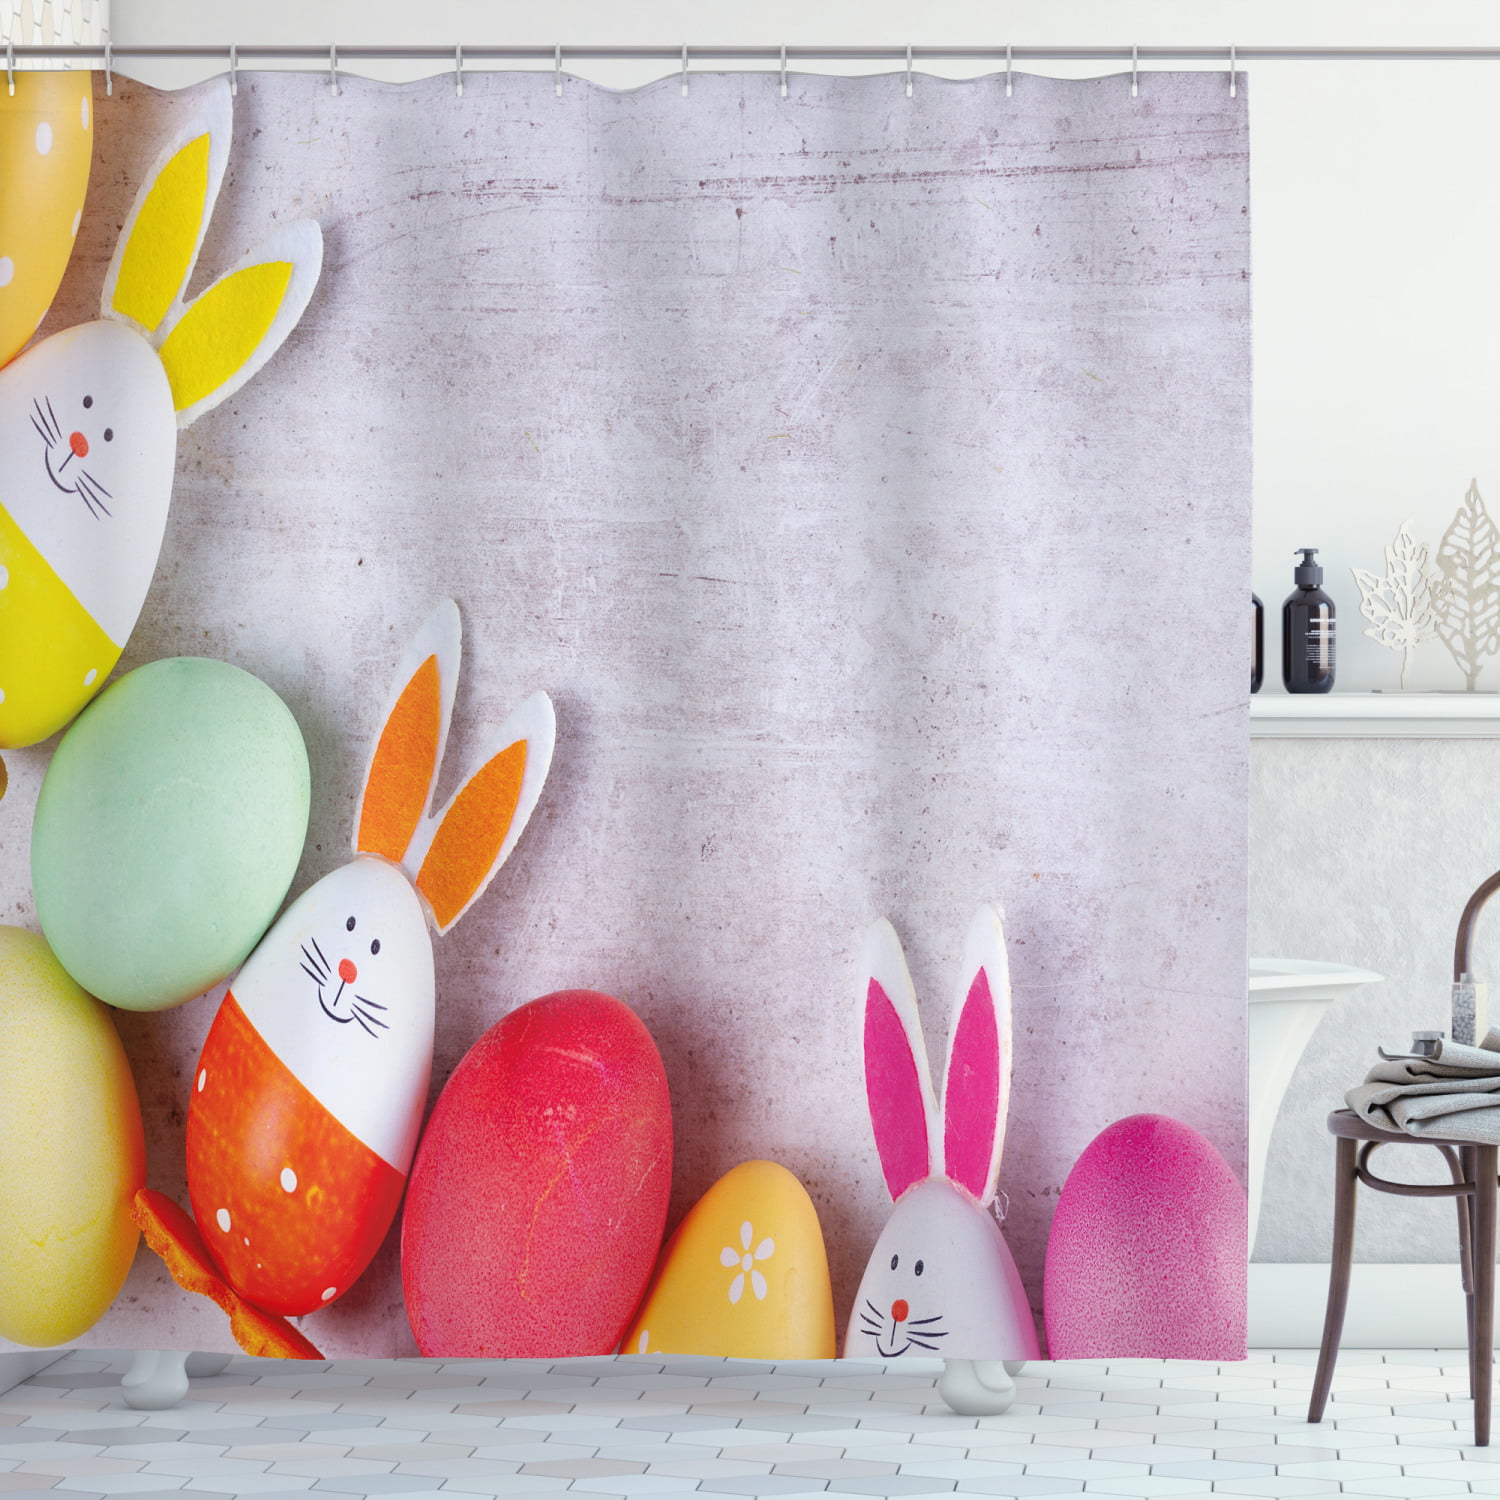 Details about  / Boy and Girl Easter Eggs Waterproof Polyester Fabric Shower Curtain Bathroom Mat